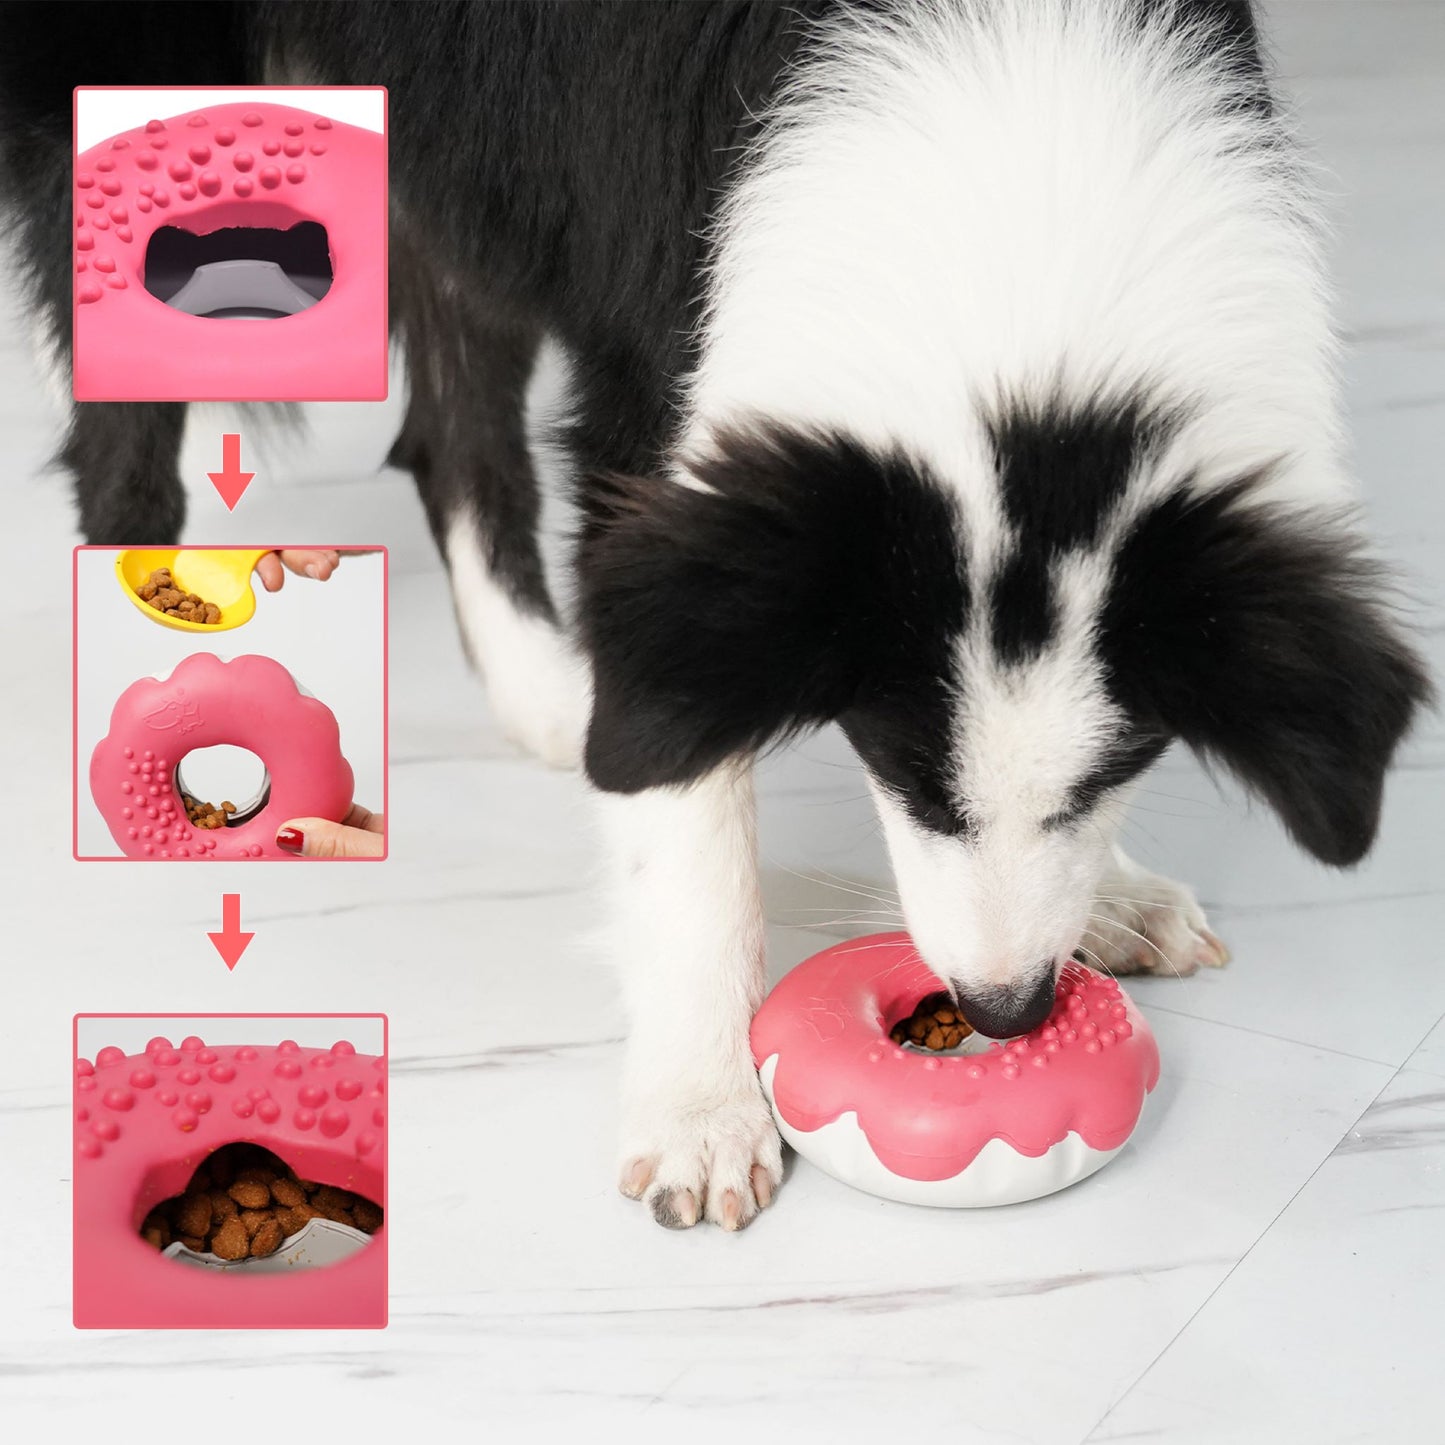 Royal Pets USA Indestructible, Durable & Tough Donut Dog Chew Toy for Aggressive Chewers. Slow Treat Dispensing Interactive Toys for S, M & L Breed-100% NATURAL RUBBER -10000 BITES TESTED - UNIQUE DESIGN FOR ORAL CARE